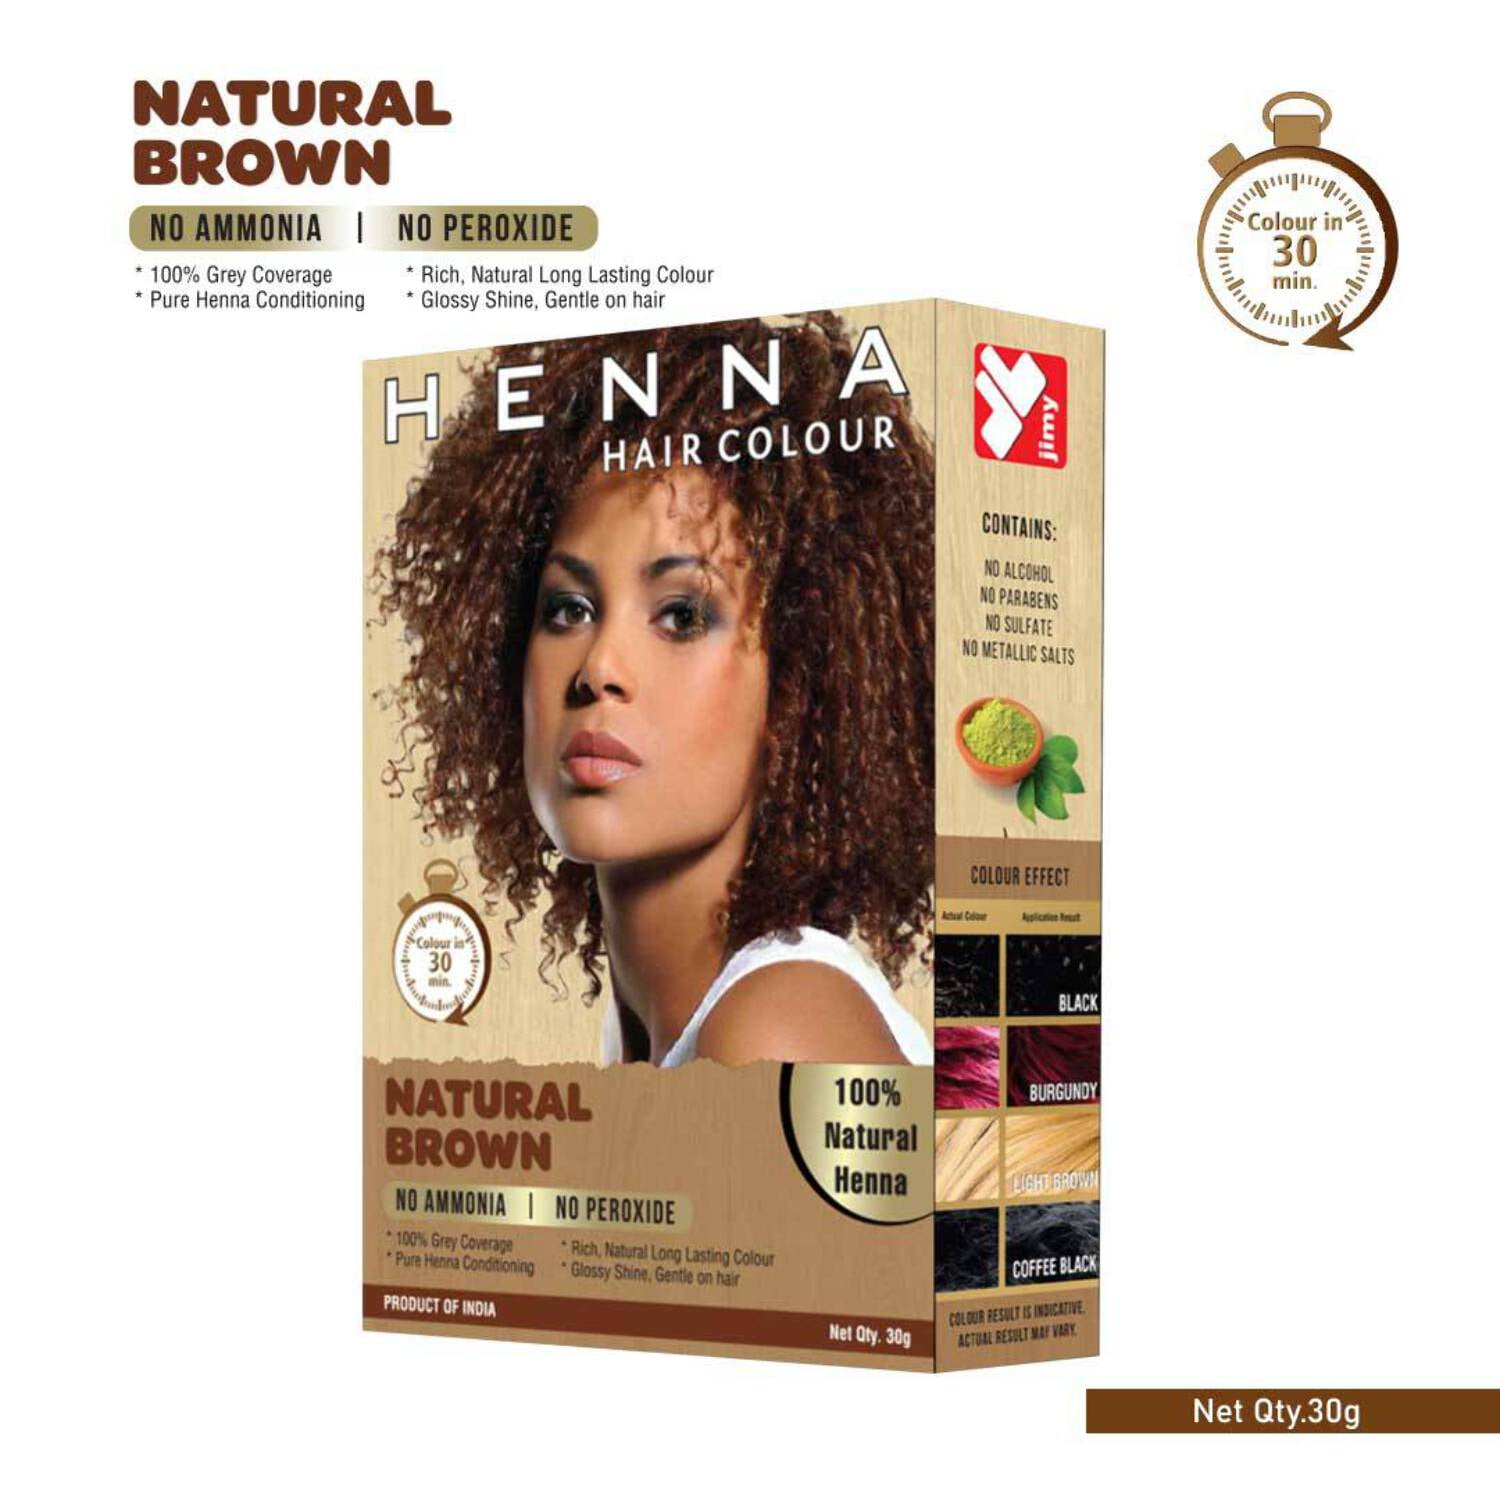 Zenia 3 Pack 100% Natural Ready to Use Henna Paste Hair Color Hair Dye Cones Reddish Brown Color